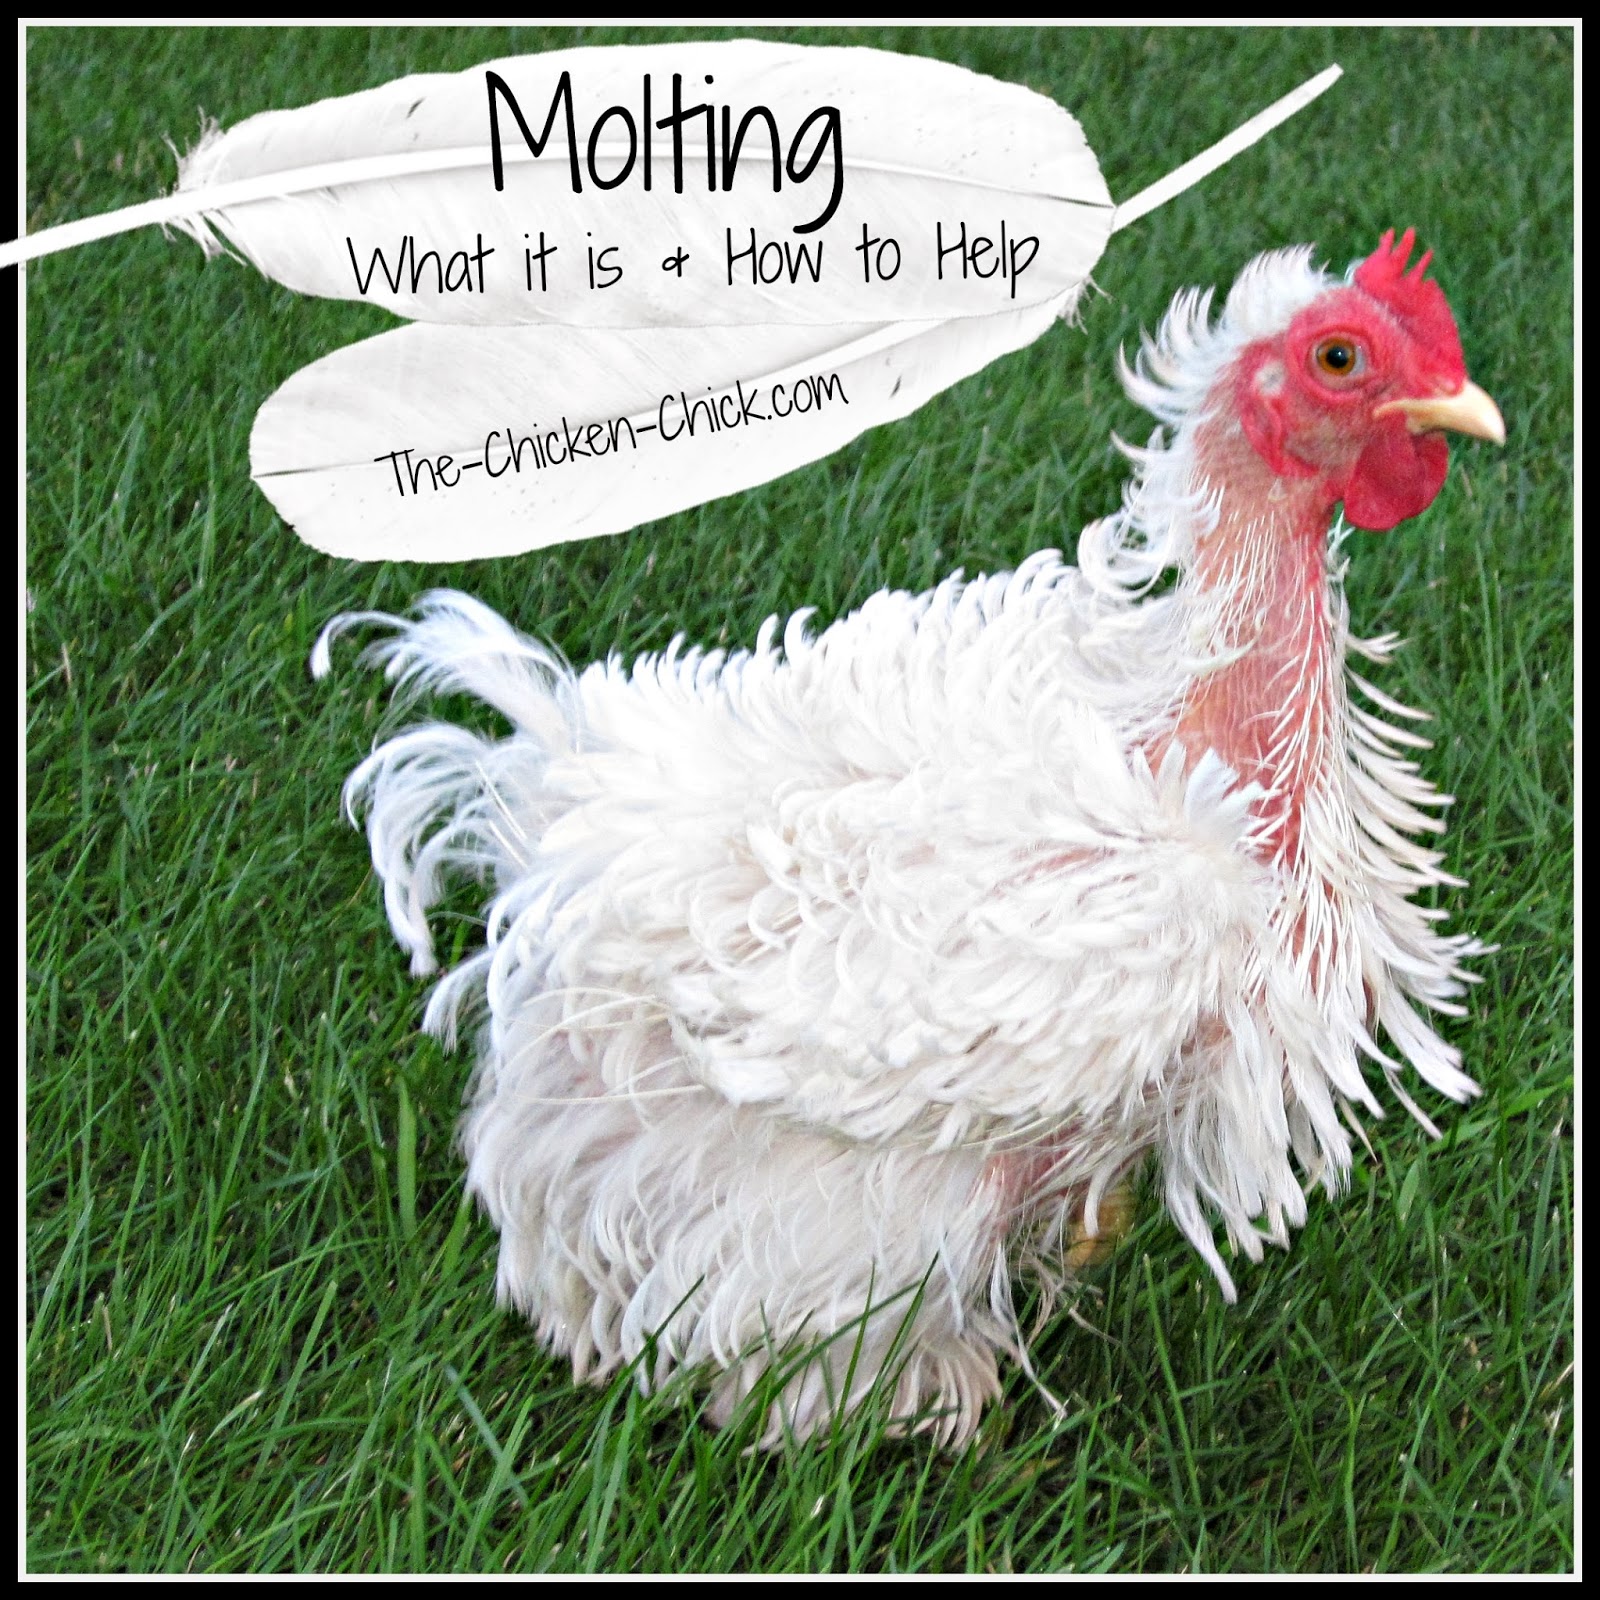 Molting What Is It And How To Help Chickens Get Through It The